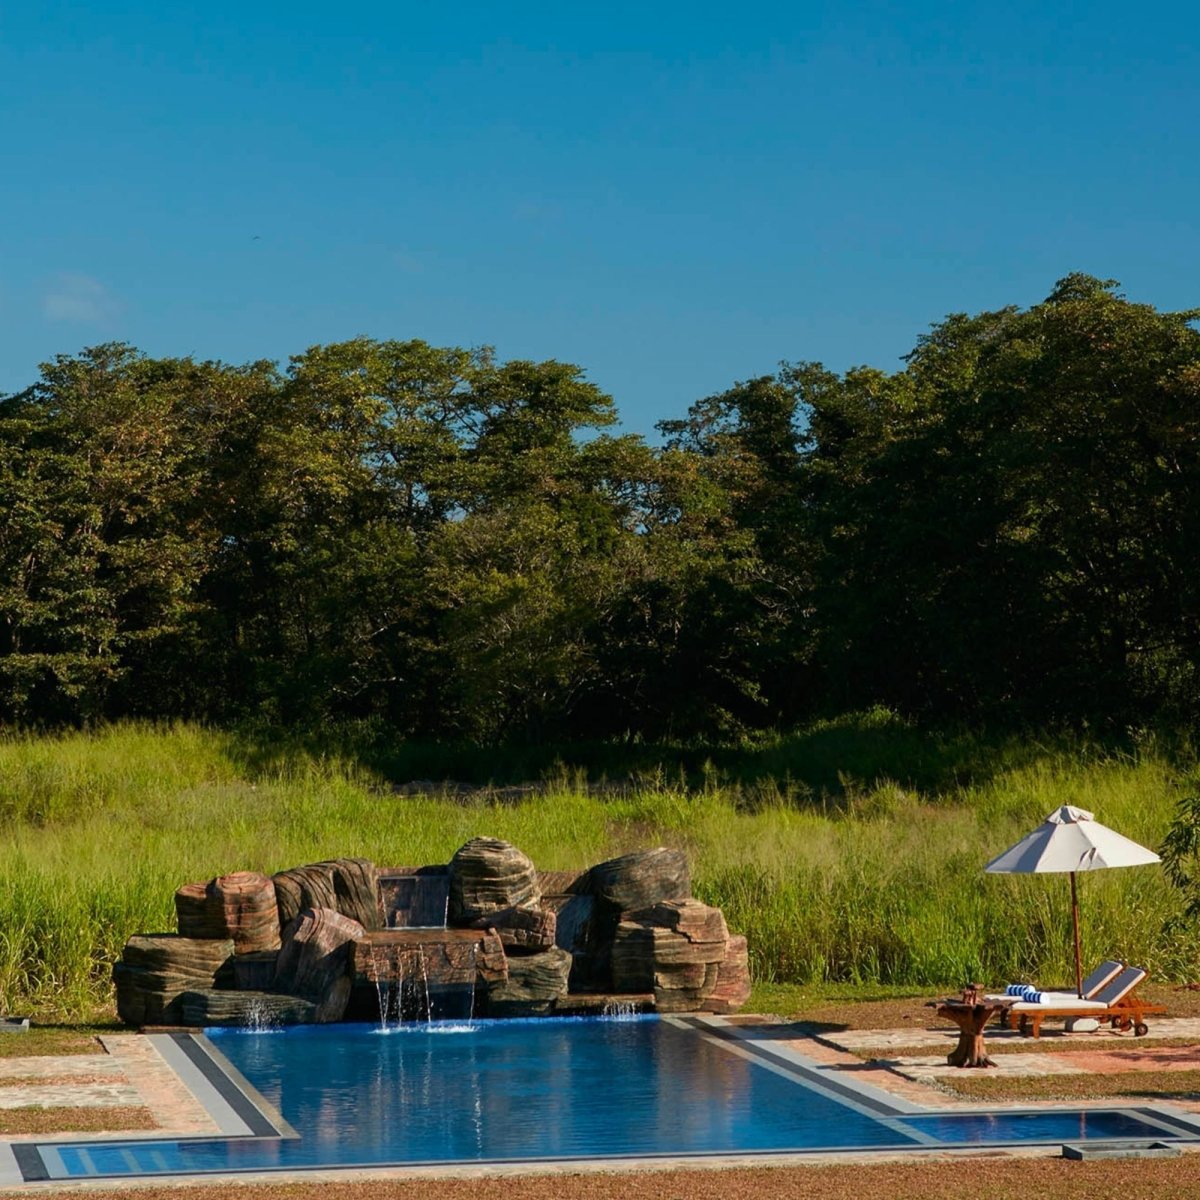 3 Days with Private Jacuzzi, Full-board, and pool access for 2 people - Seerock The King’s Domain Hotel, Sigiriya | Feelo